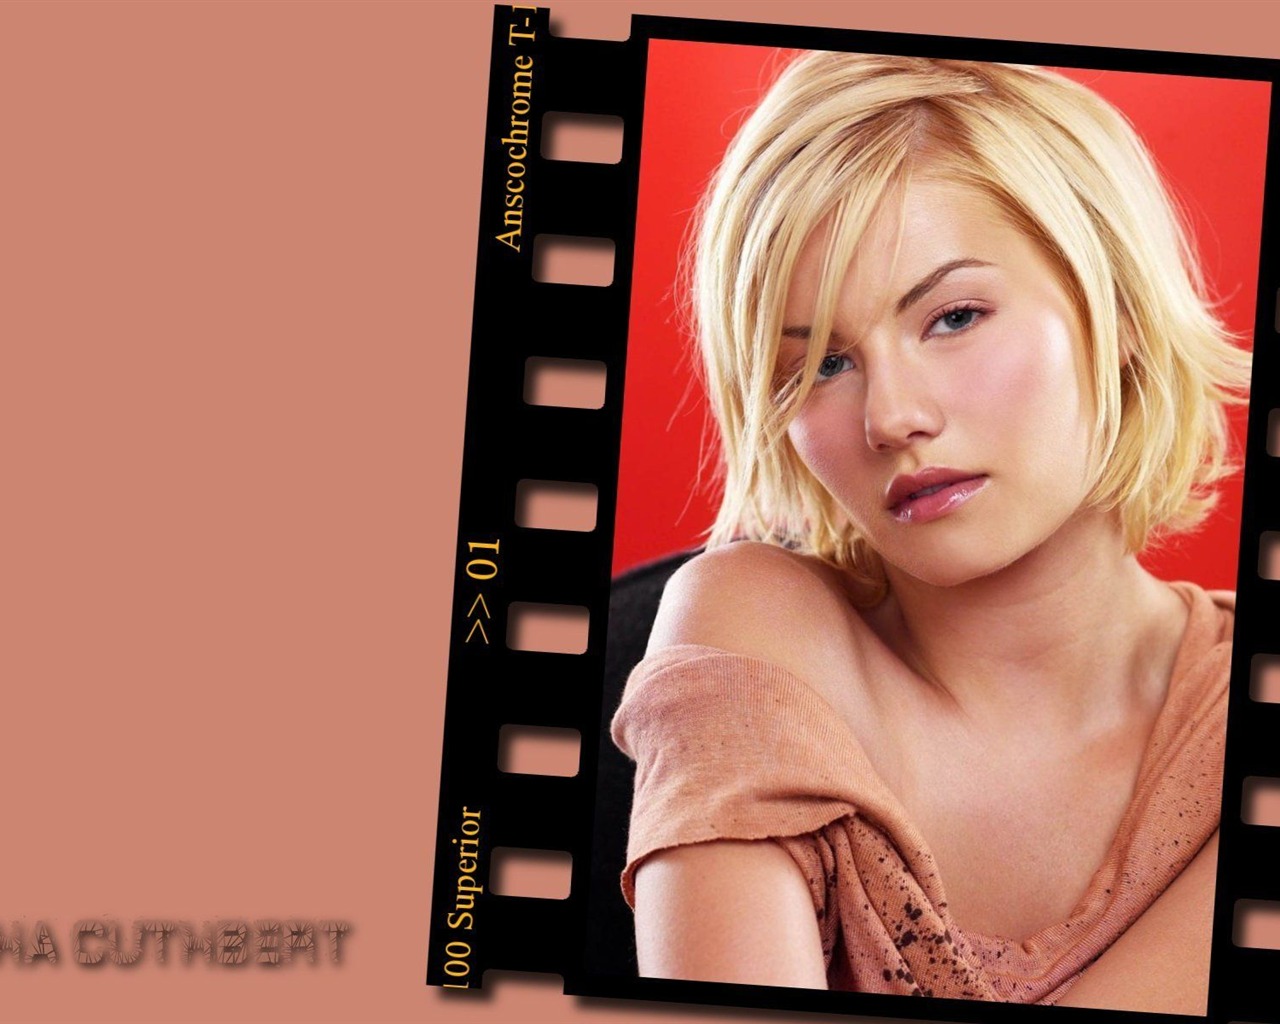 Elisha Cuthbert #015 - 1280x1024 Wallpapers Pictures Photos Images